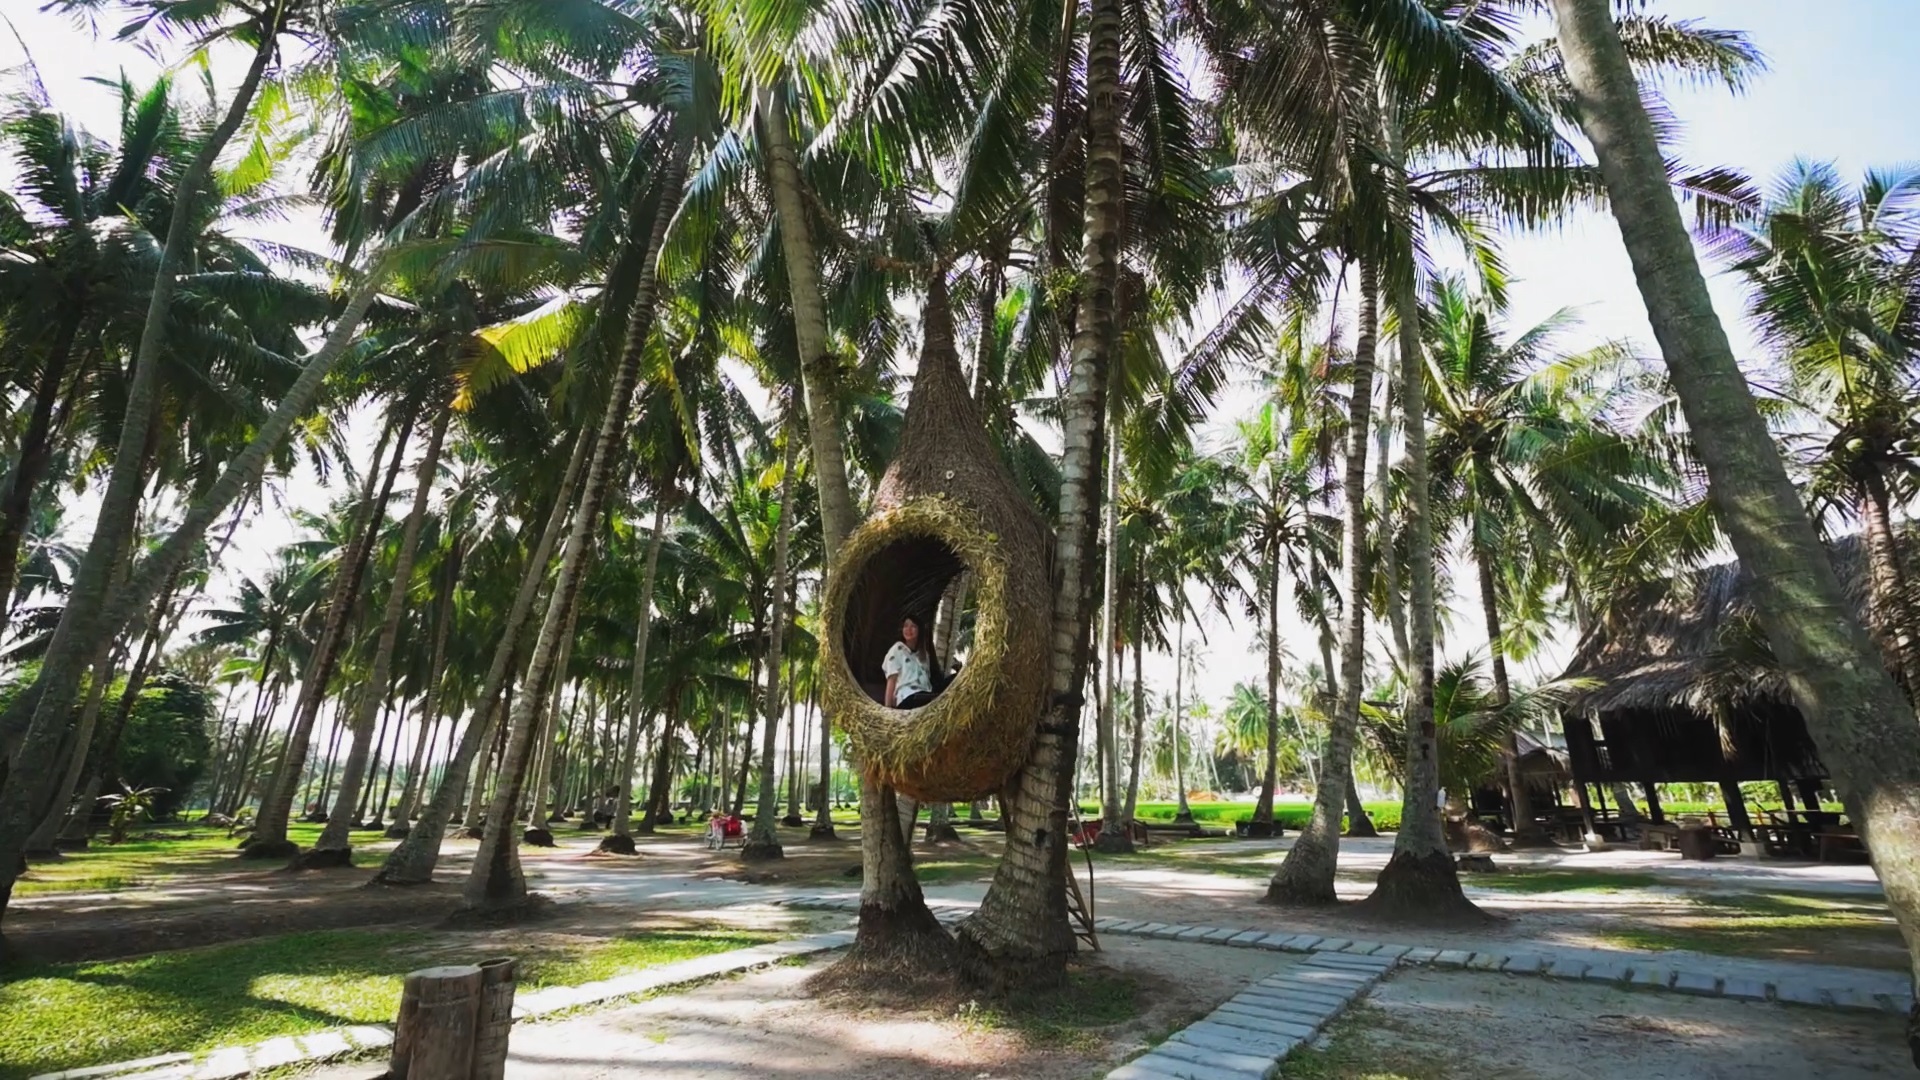 Scenic Kampung Agong is a soothing escape for nature-lovers